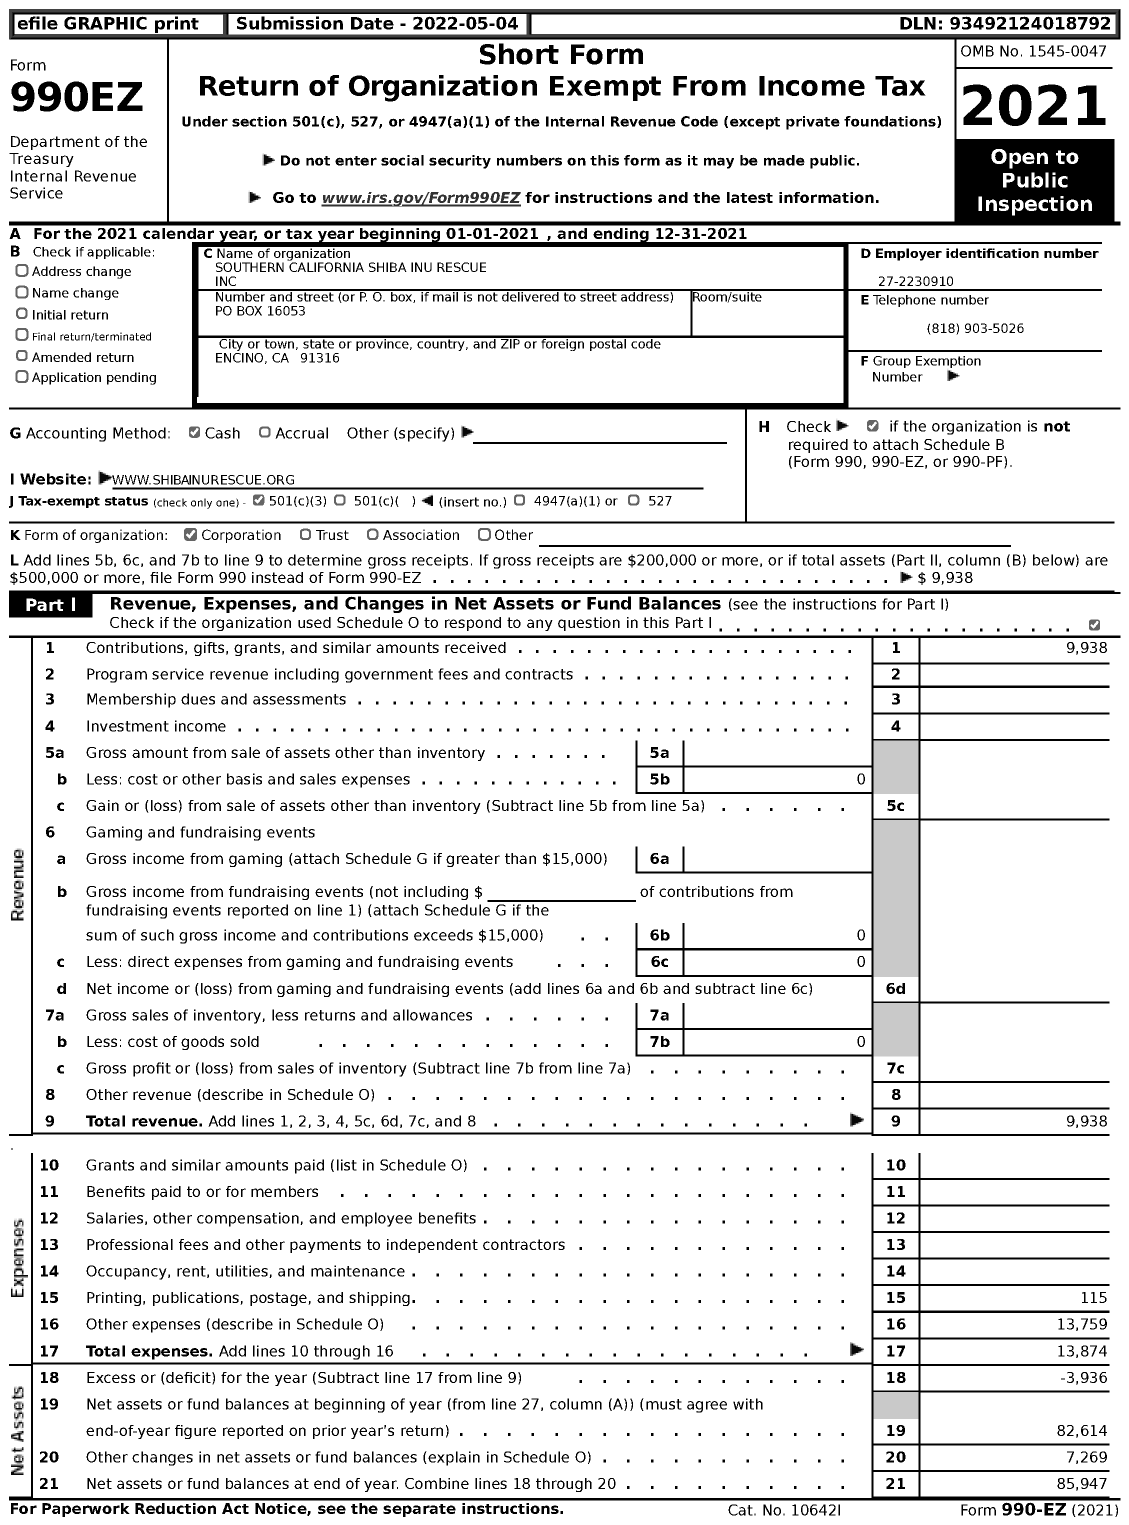 Image of first page of 2021 Form 990EZ for Southern California Shiba Inu Rescue